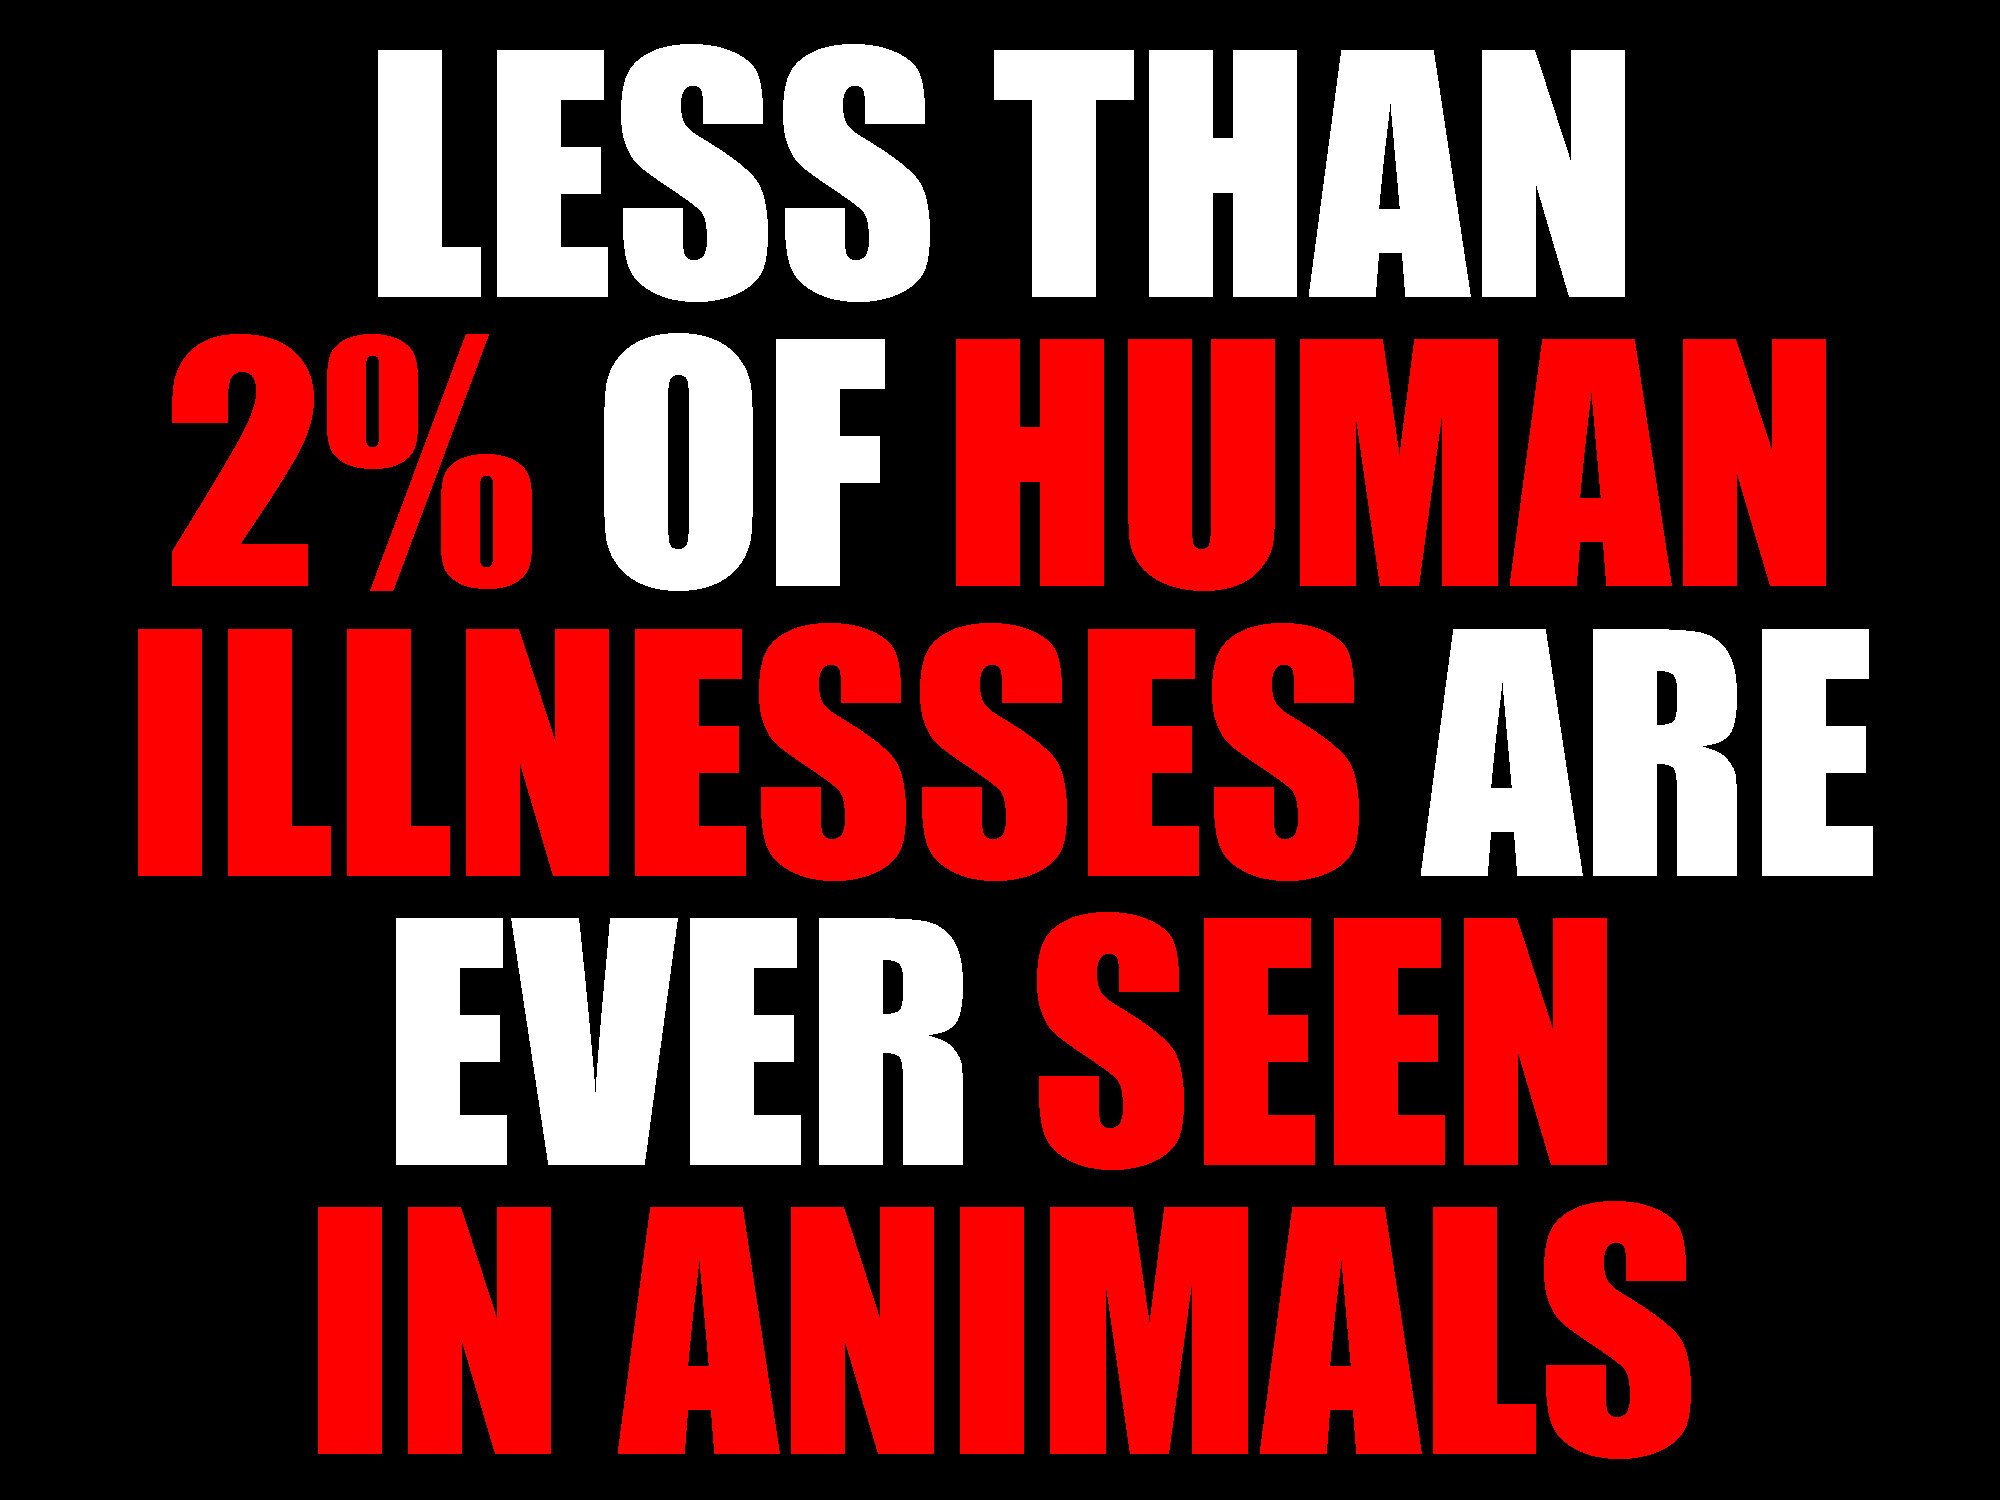 less than 2% of human illnesses are ever seen in animals.jpg